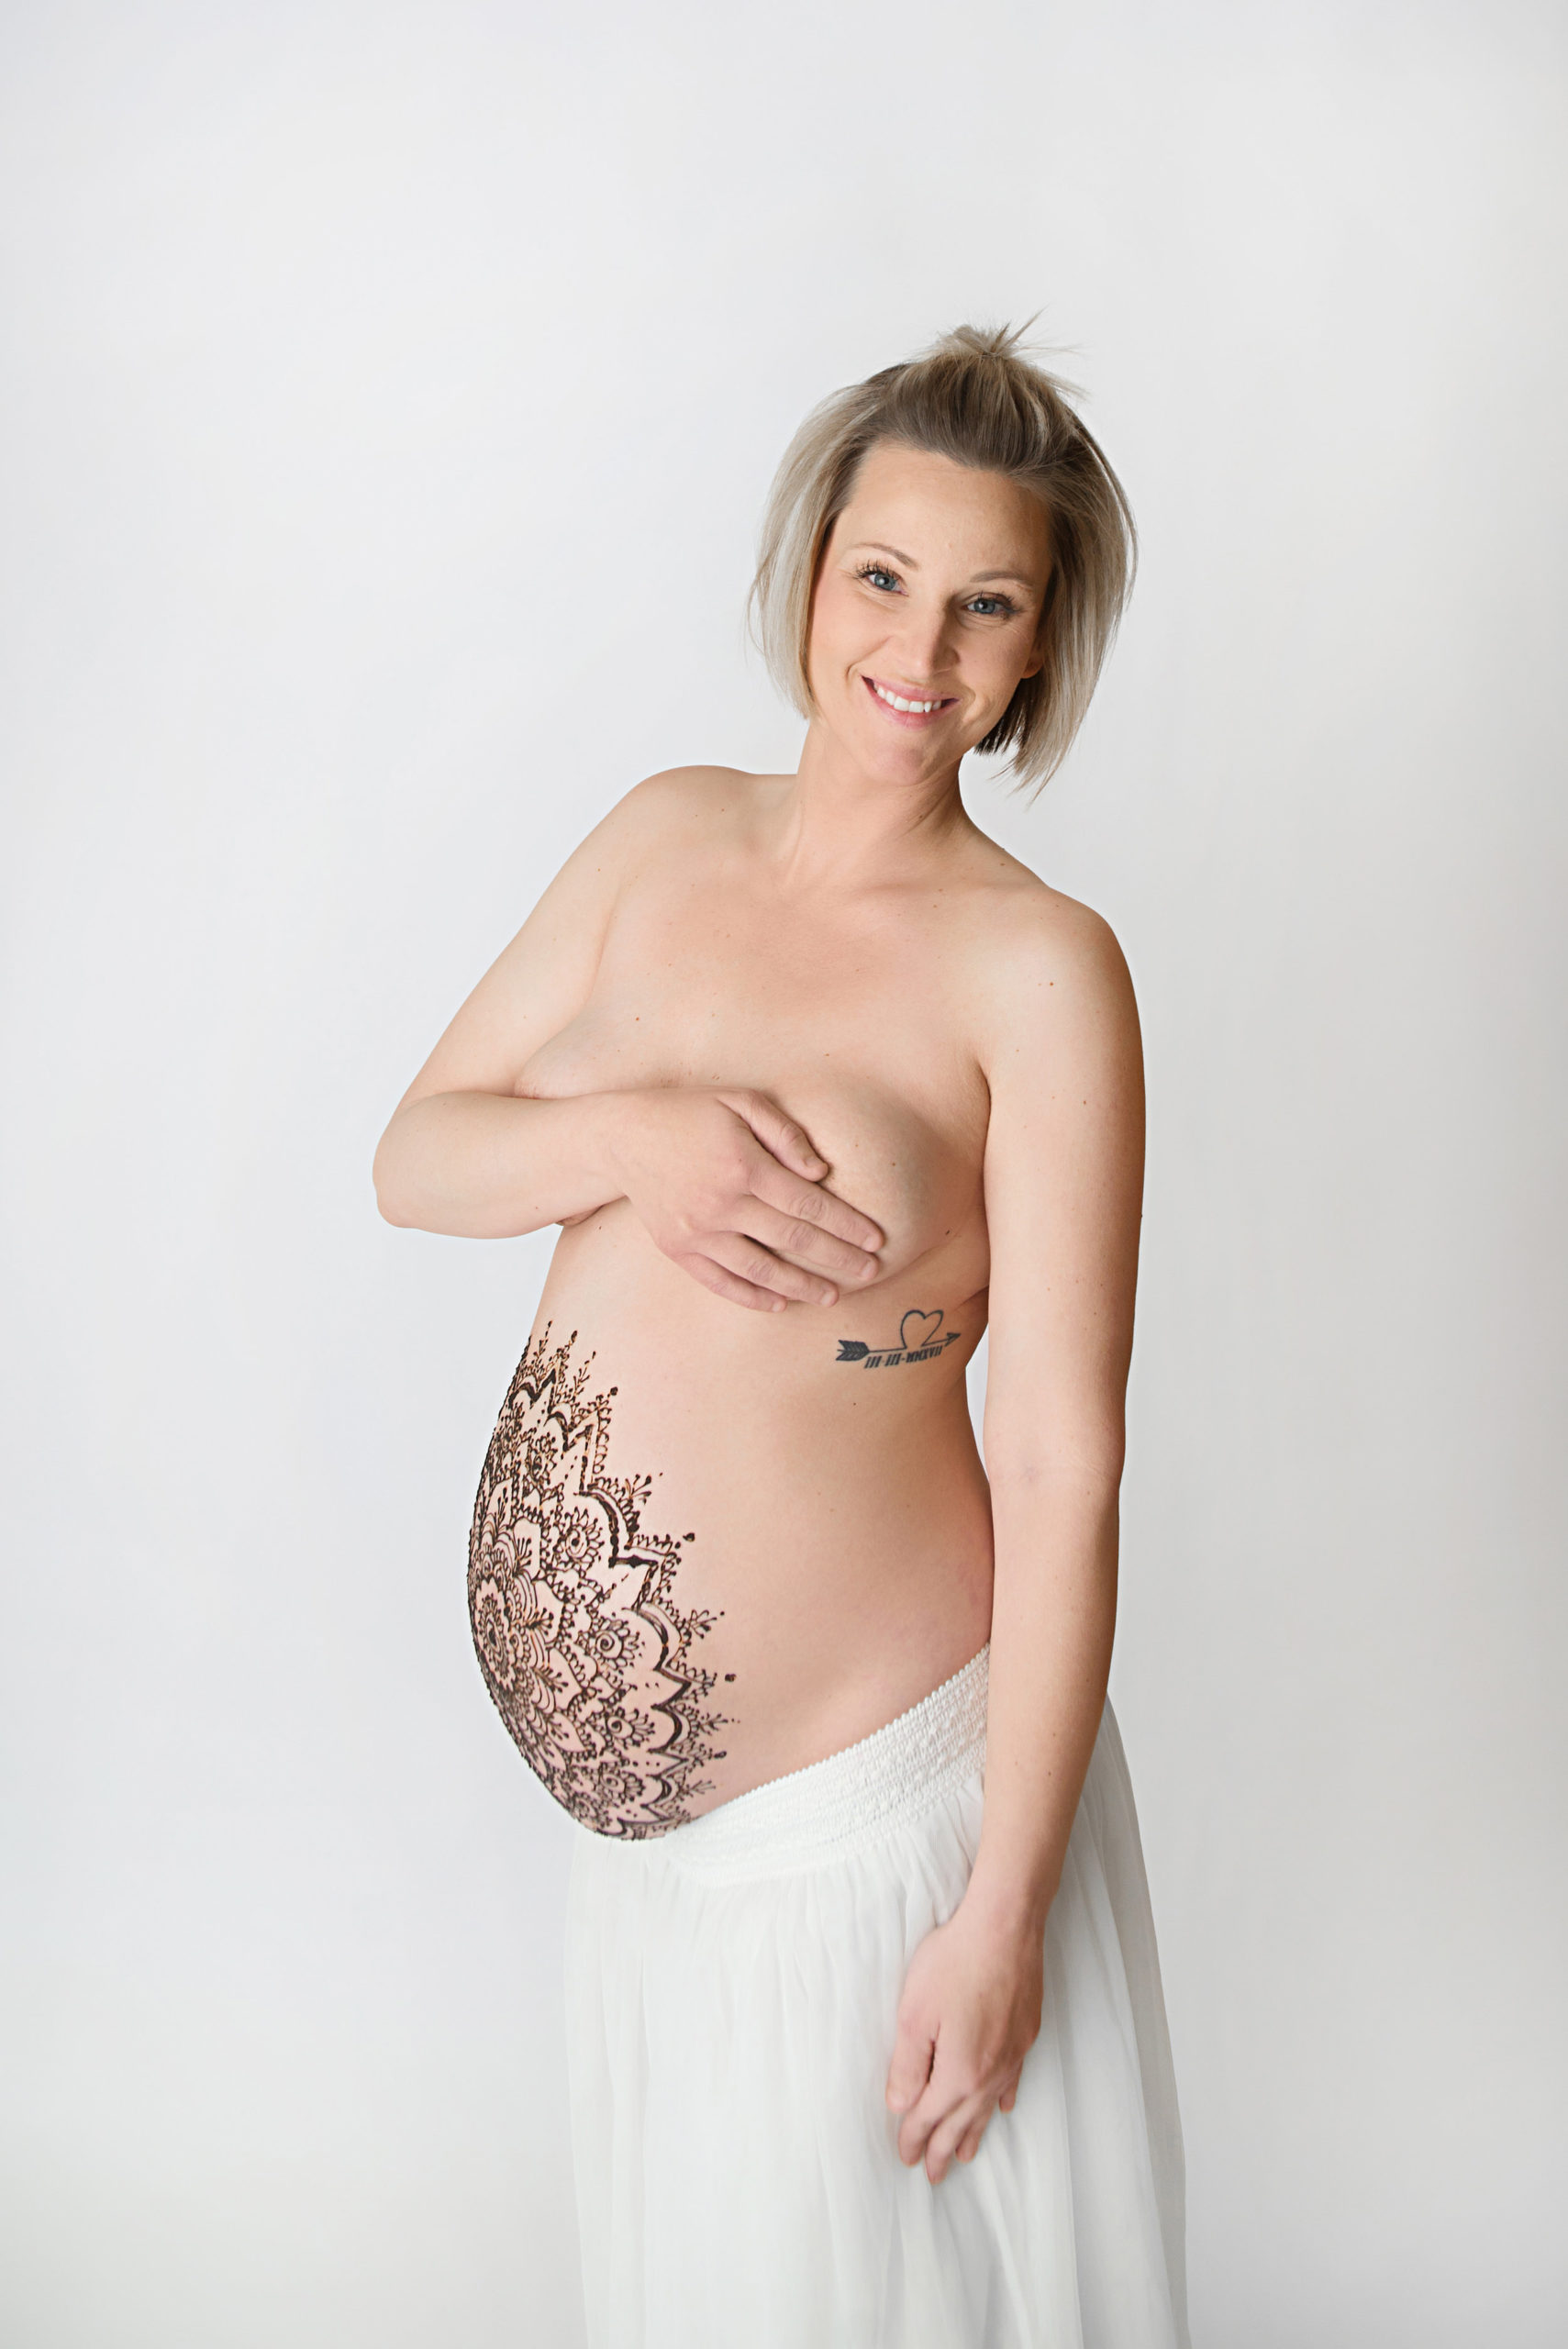 st-louis-maternity-henna-photography-pregnant-mom-on-white-backdrop-looking-at-camera-covering-breasts.jpg